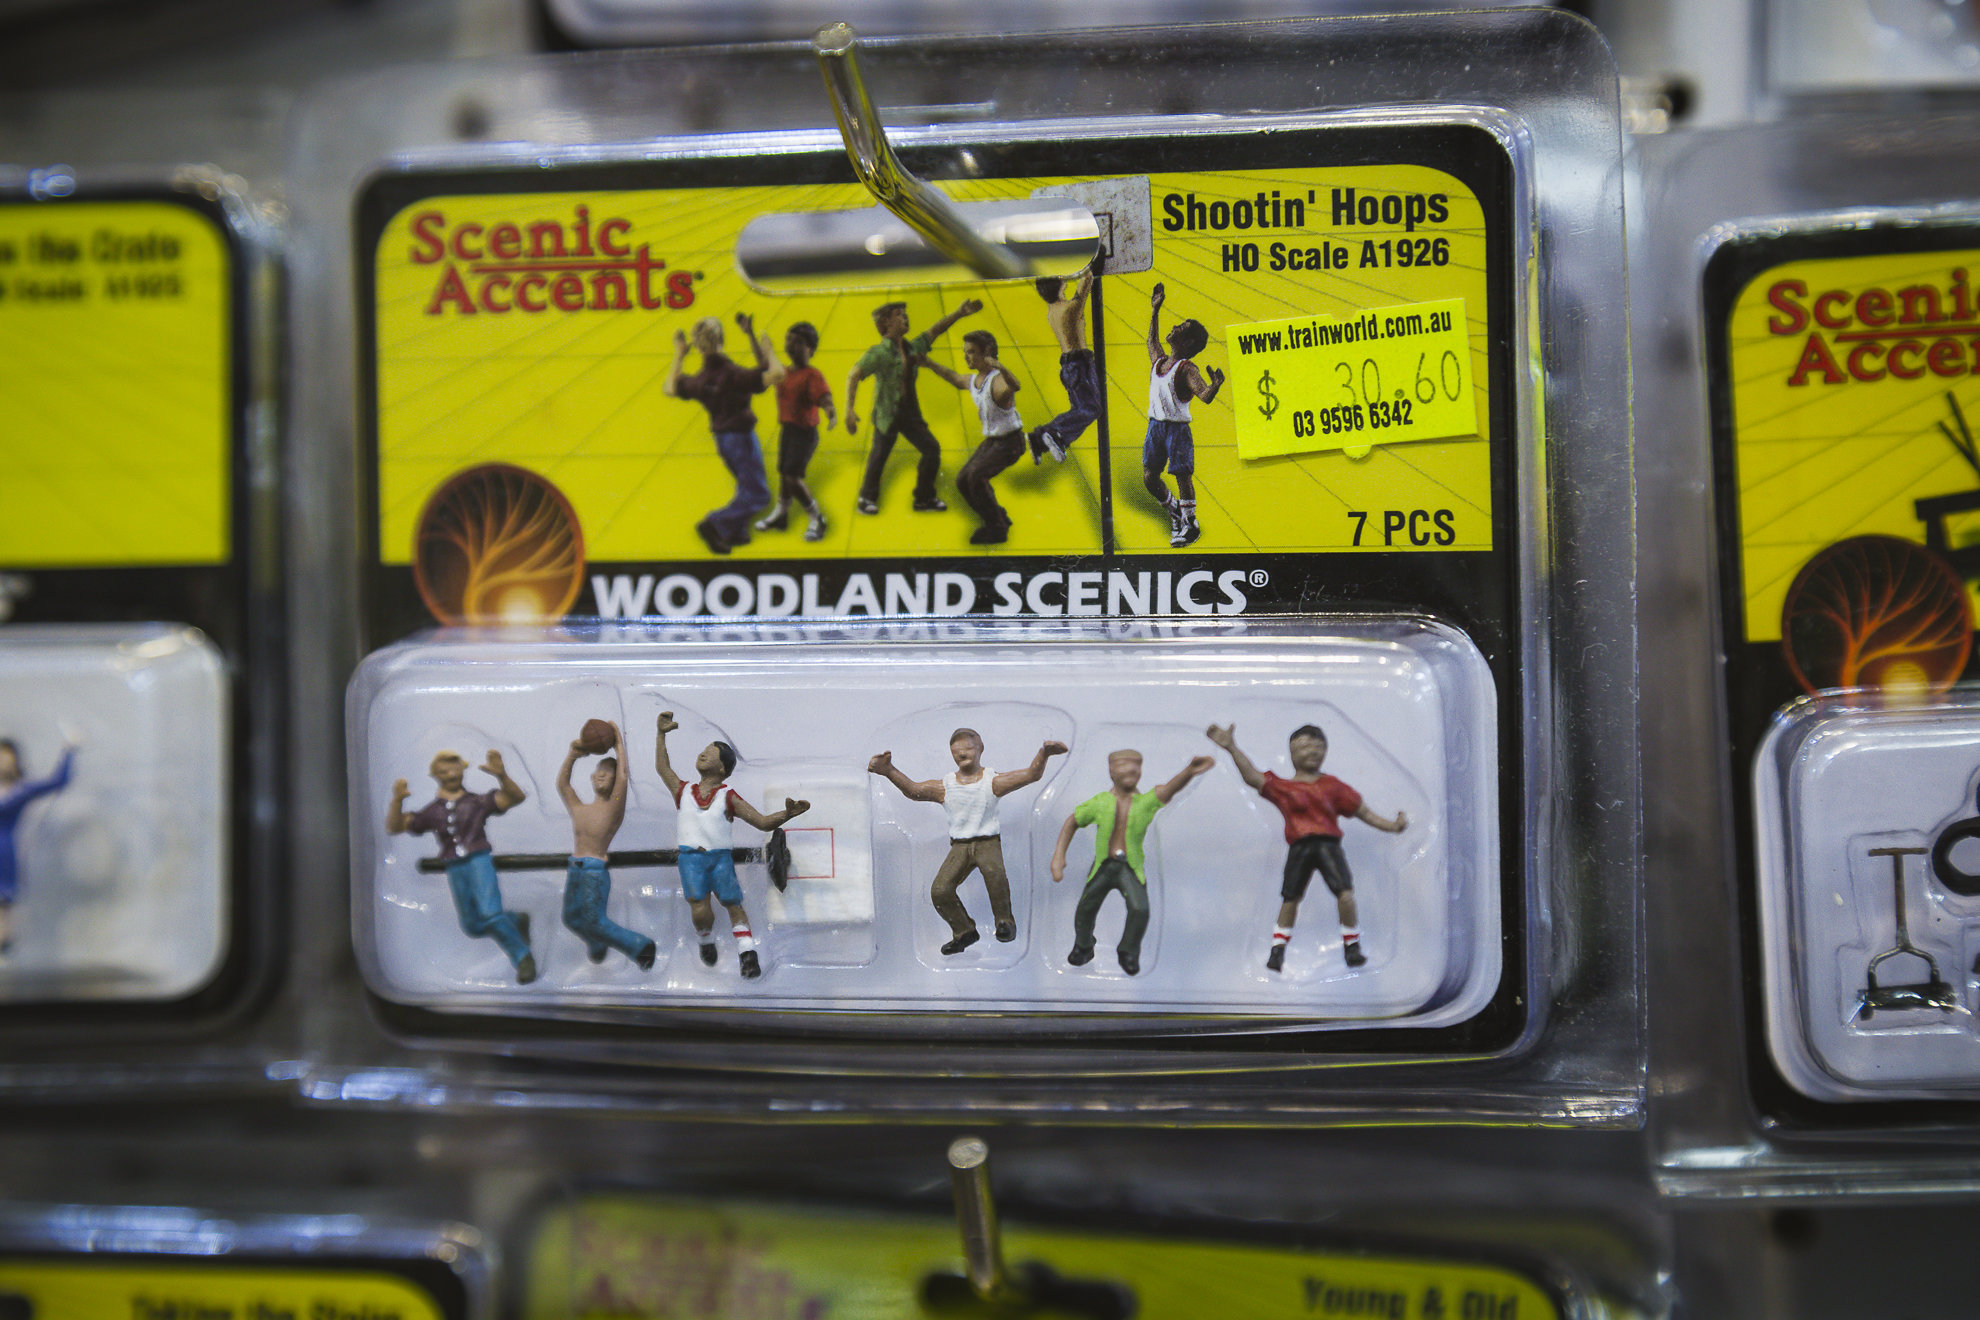 Woodland Scenics HO Scale Shootin Hoops Figures A1926 for sale online